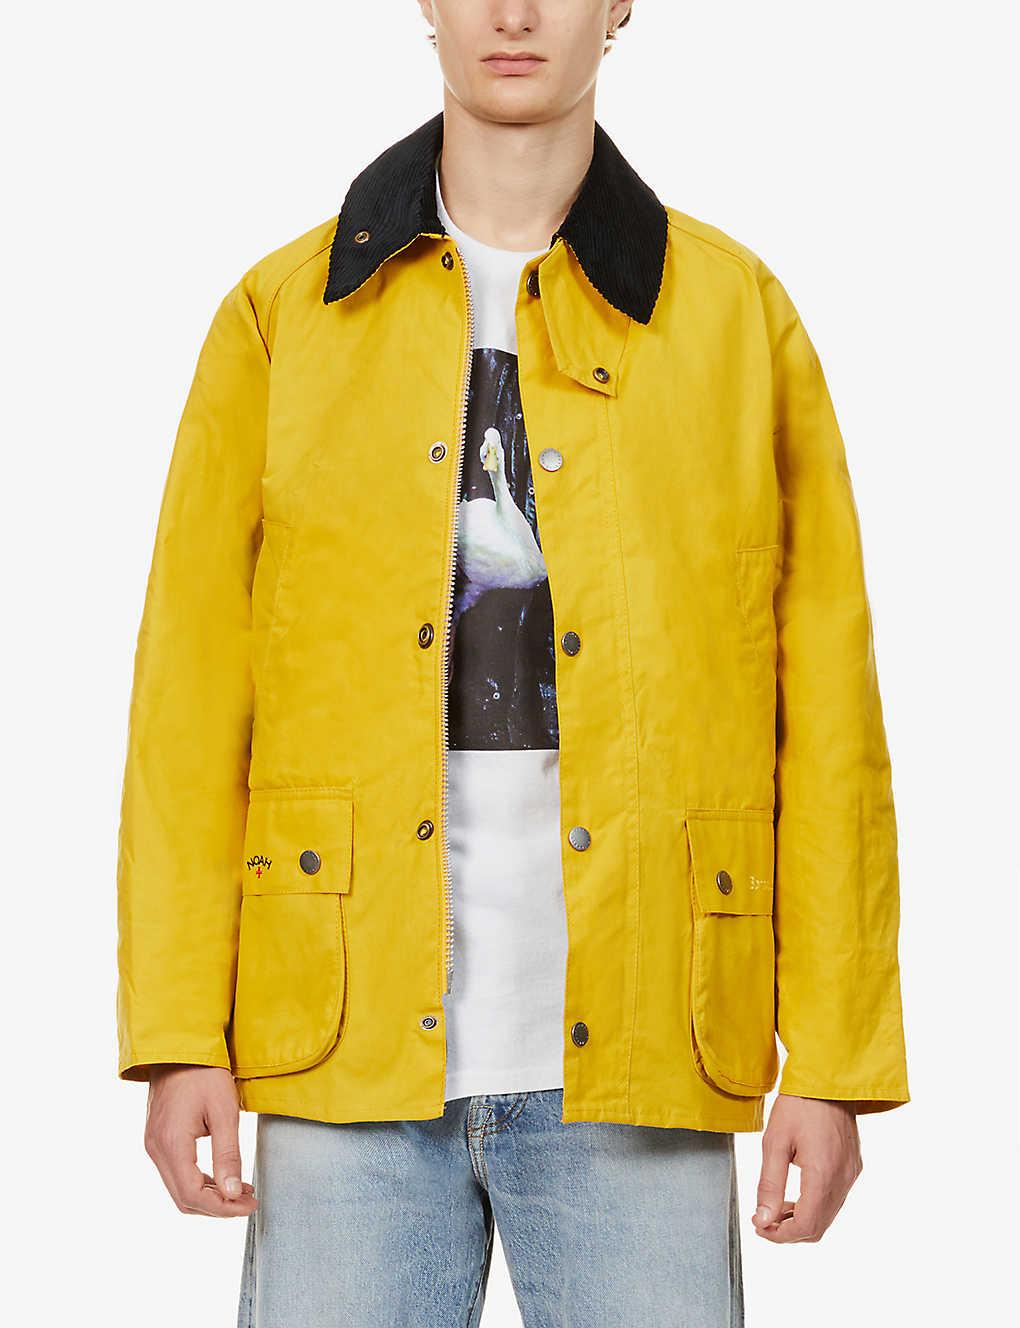 Barbour X Noah Bedale Corduroy-collar Ashell Jacket in Yellow for Men - Lyst